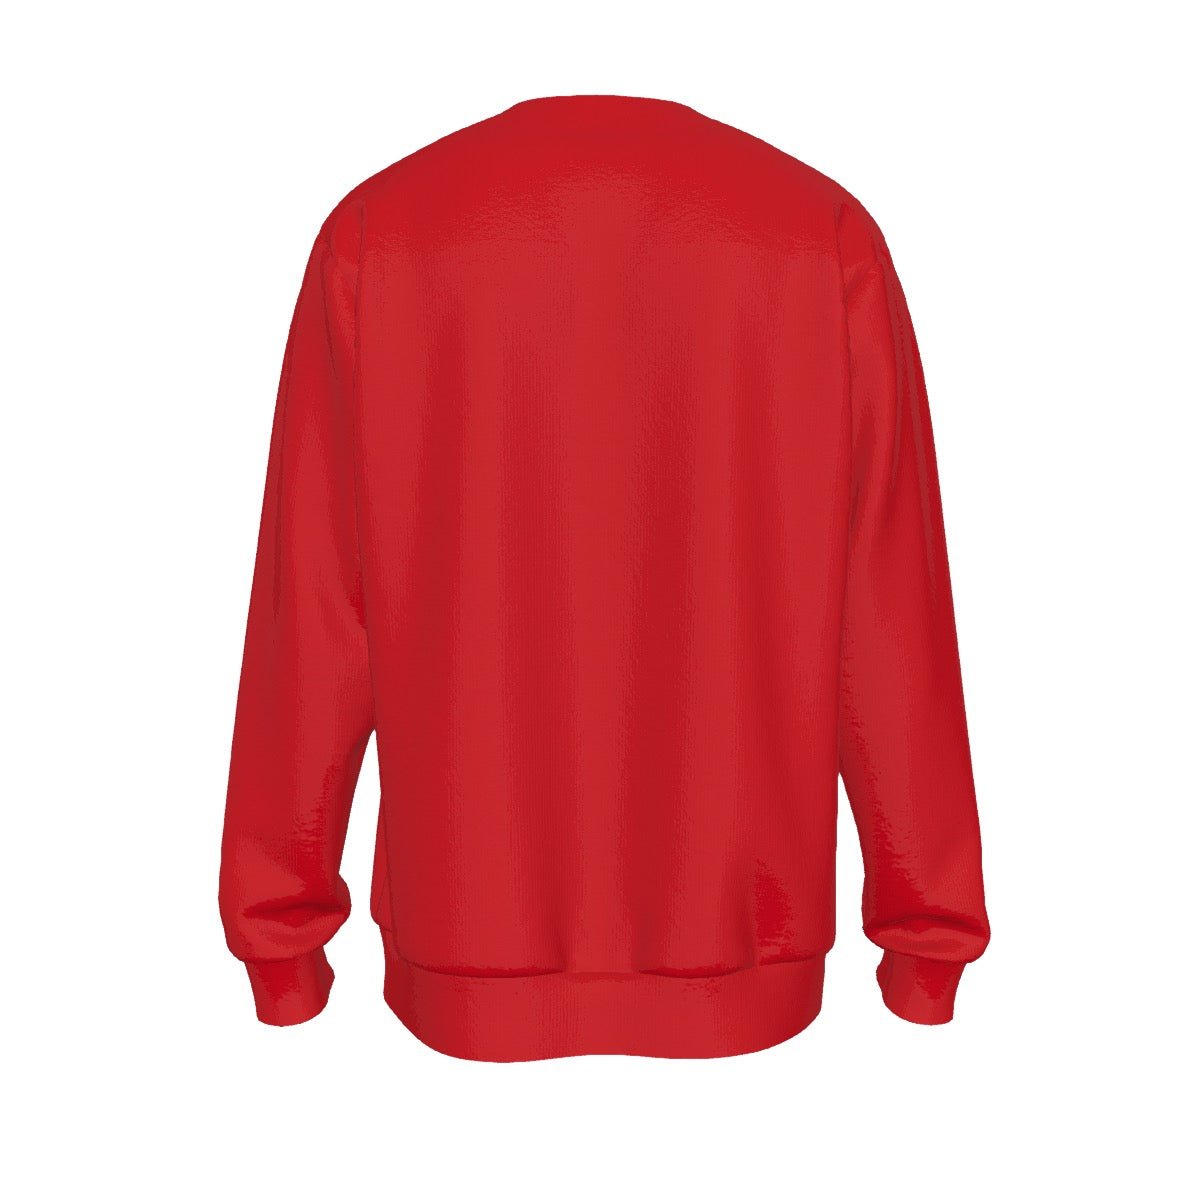 Men's Christmas Sweater - Merry Christmas - Red - Festive Style